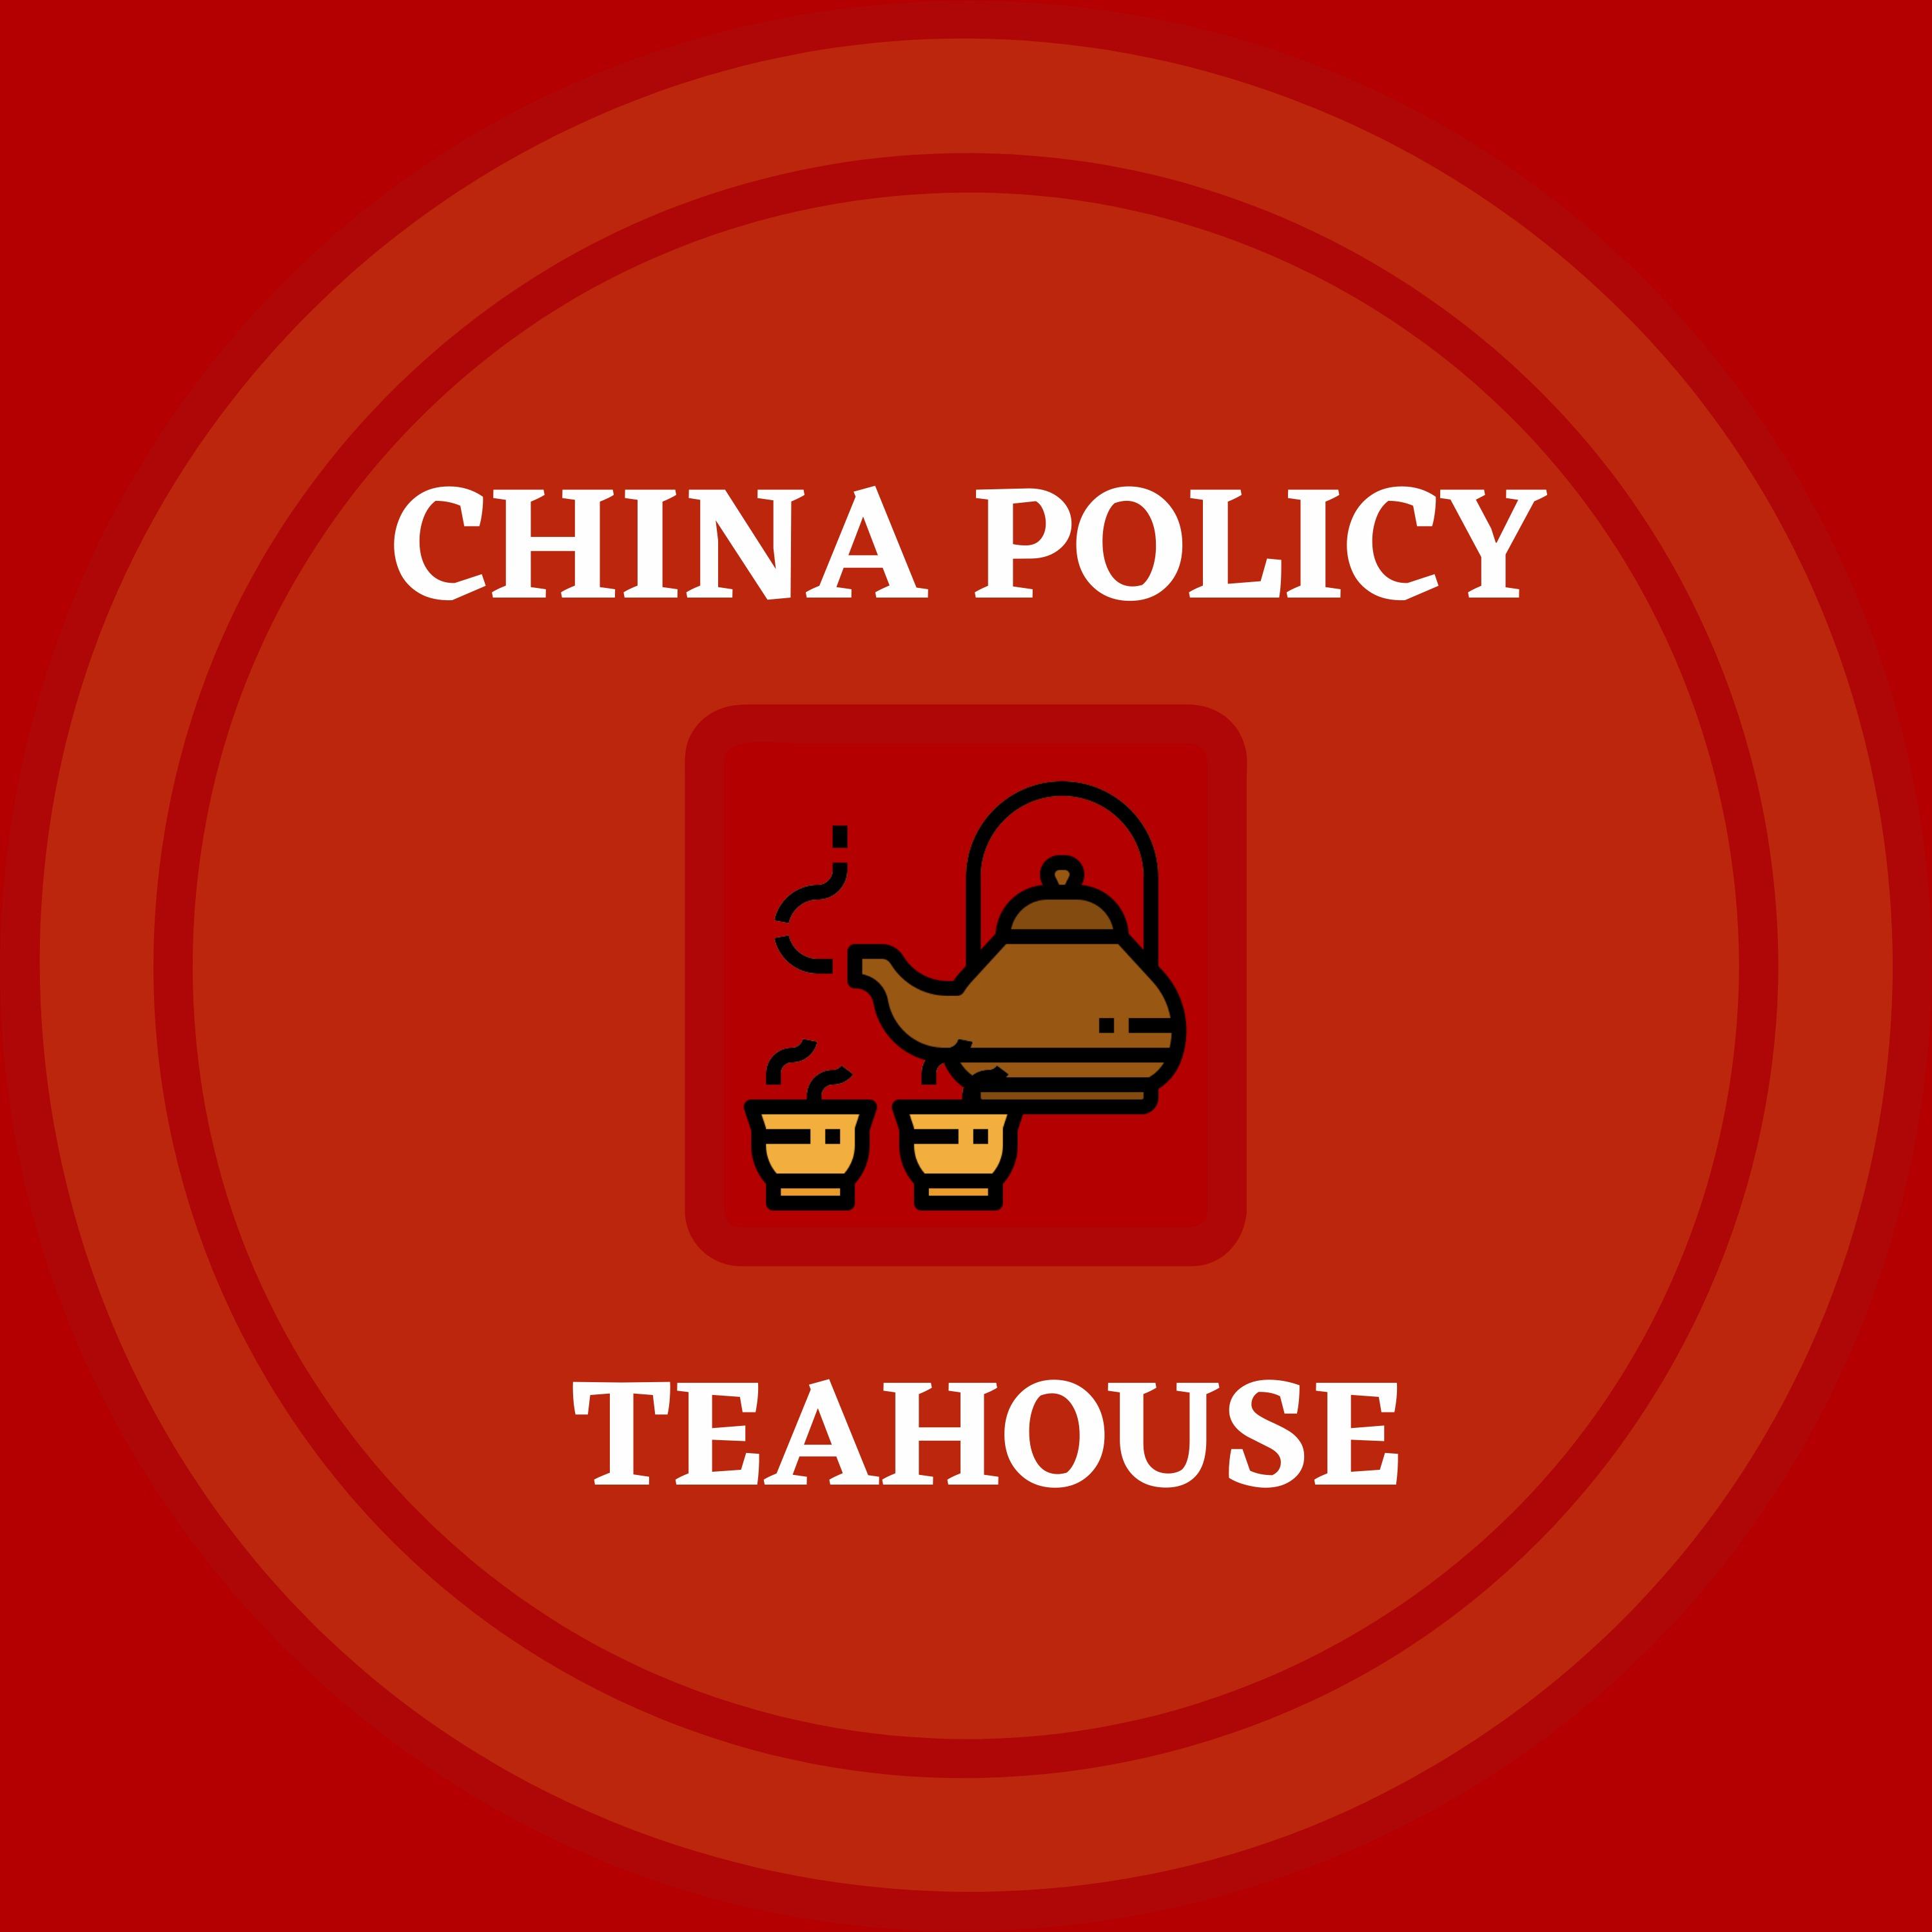 The China Policy Teahouse